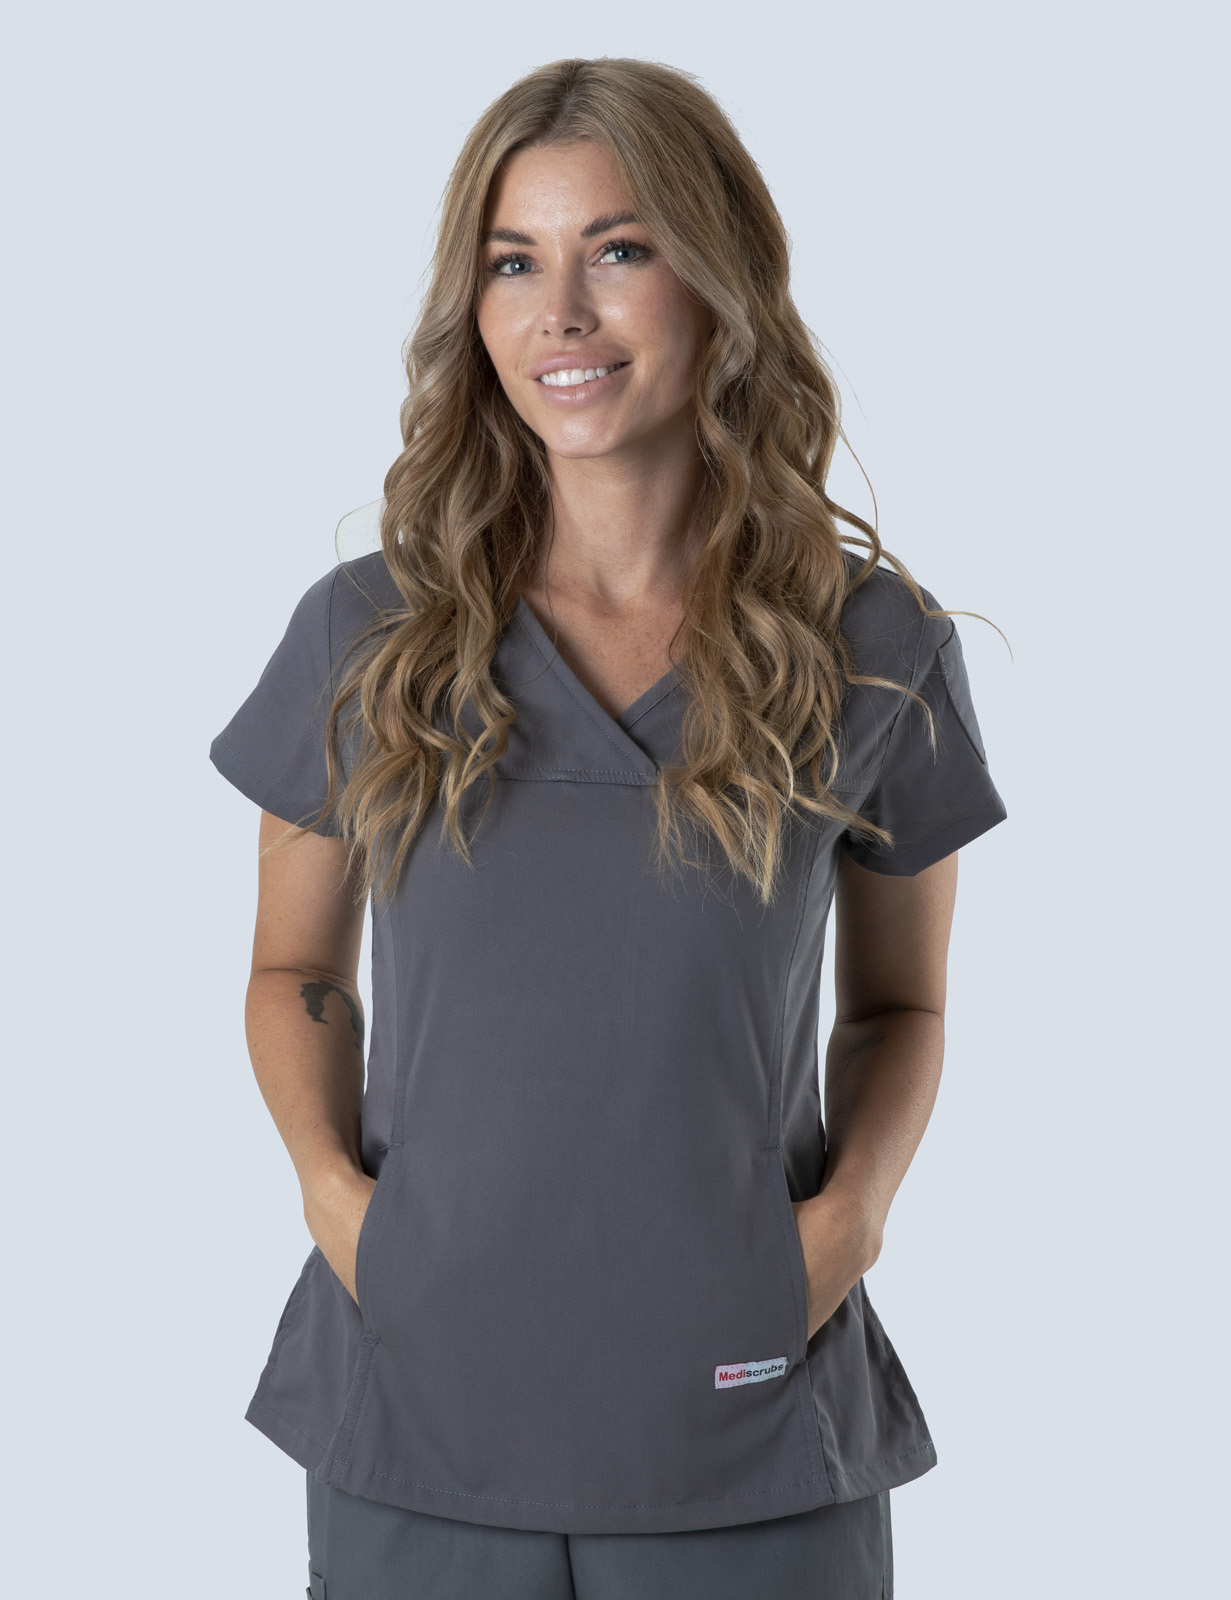 Gympie Hospital - RN Emergency (Women's Fit Solid Scrub Top and Cargo Pants in Steel Grey incl Logos)